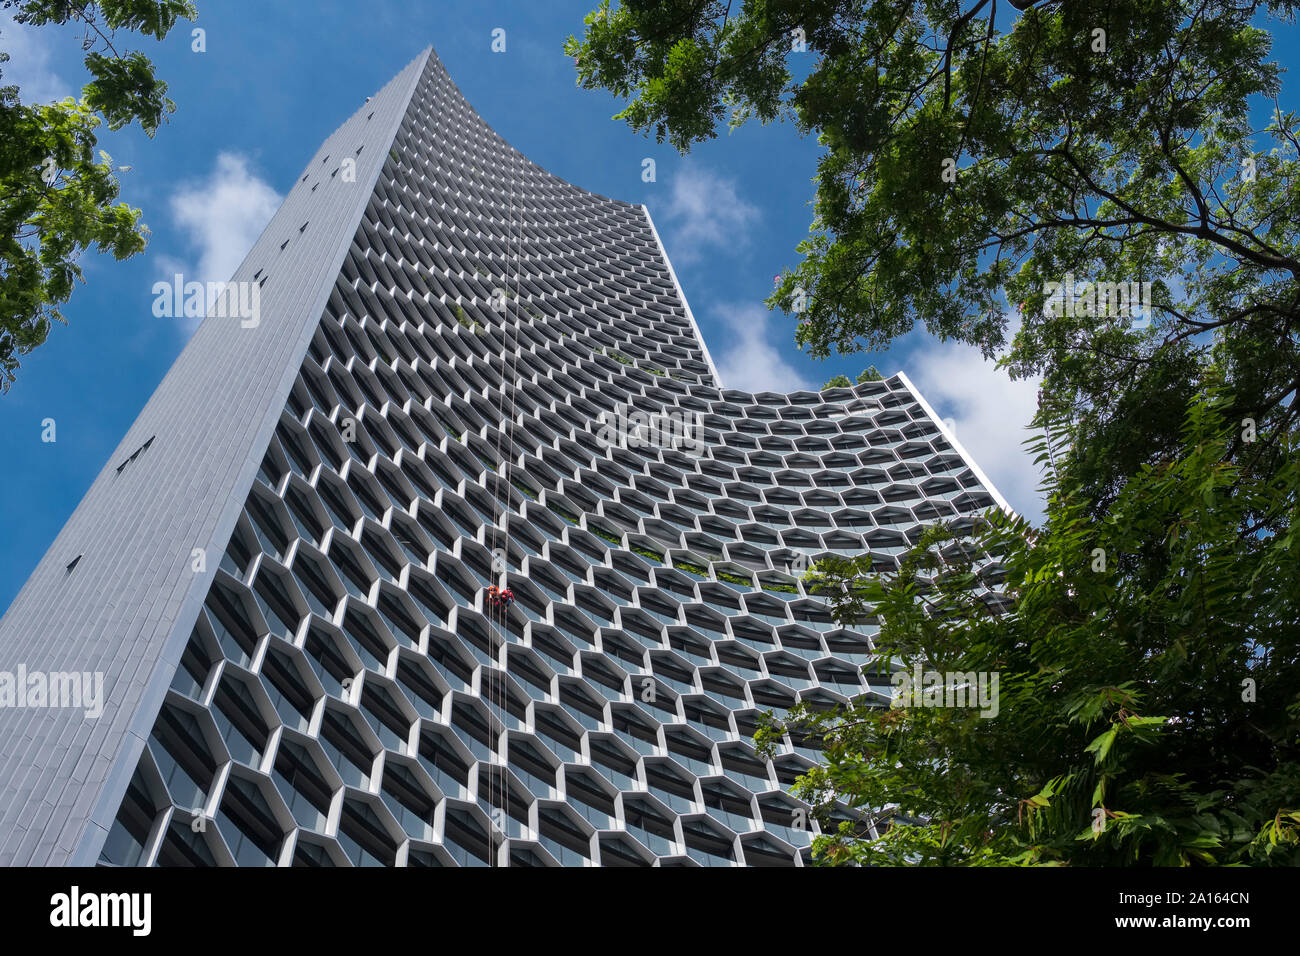 Singapore: the DUO twin towers (architect Buro Ole Scheeren). Steeplejacks cleaning the metal structure Stock Photo